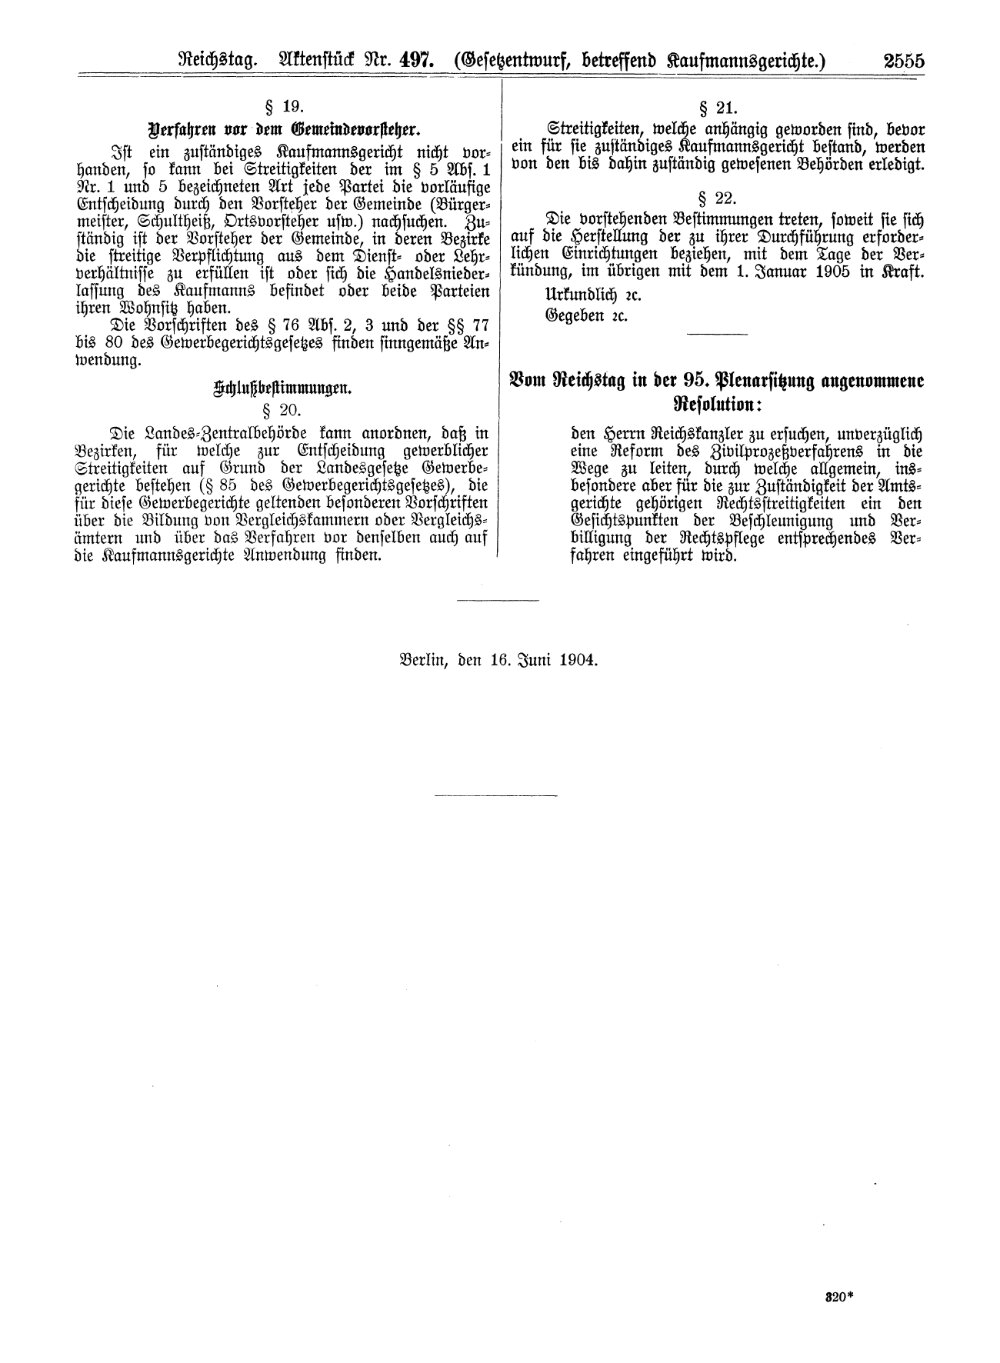 Scan of page 2555